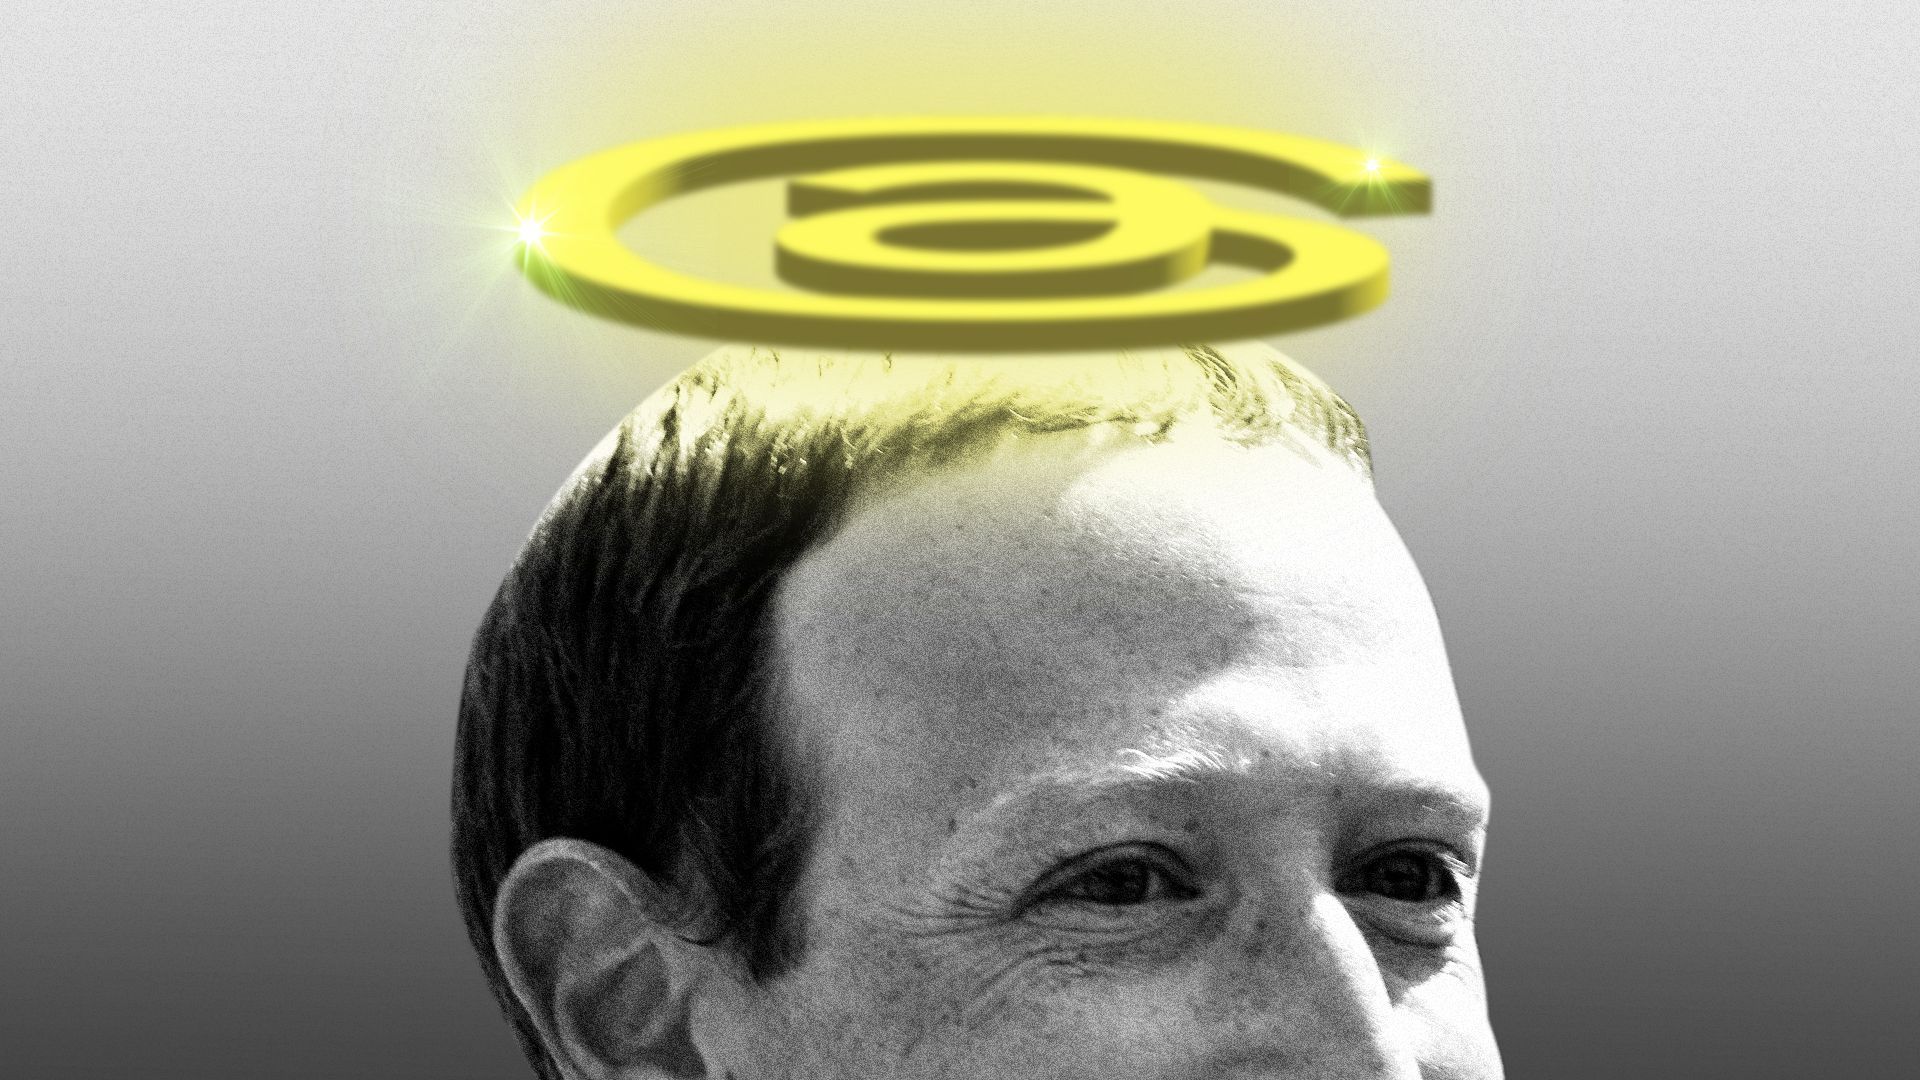 Illustration of Mark Zuckerberg with the Threads logo as a halo